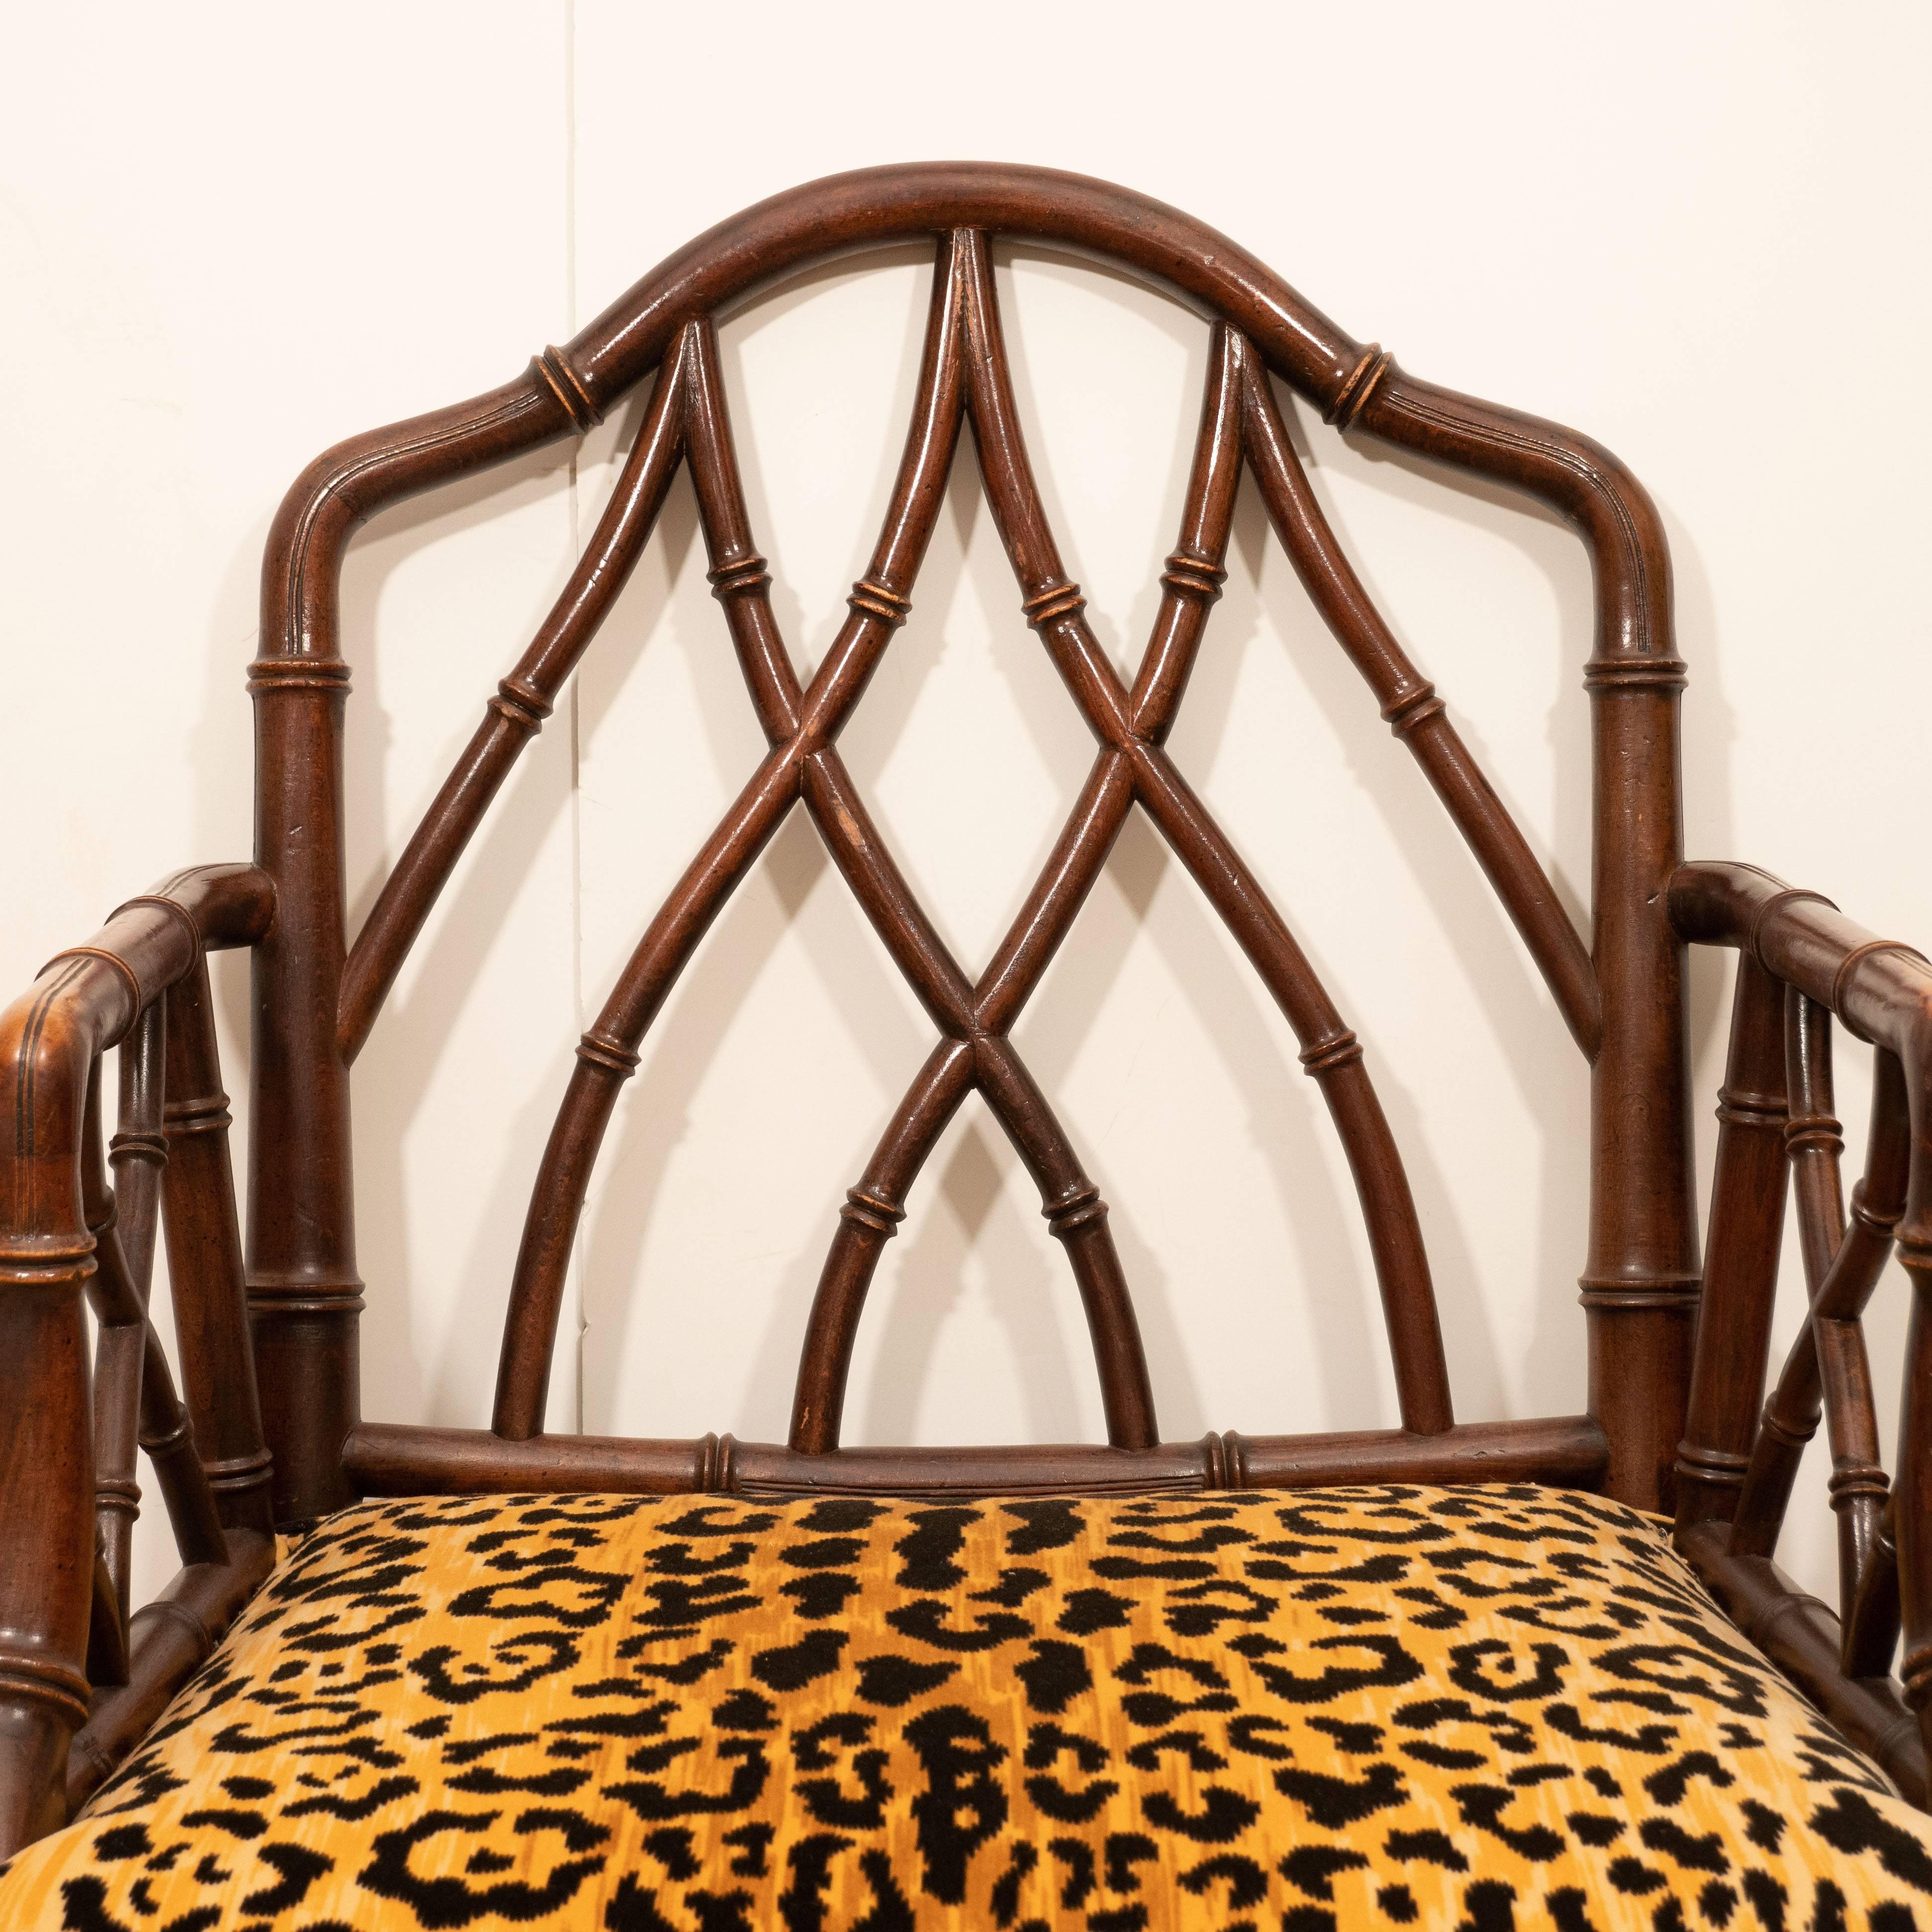 We all need a little bamboo and animal print in our lives, and these chic chairs combine the two! This pair is quite sturdy and very well constructed, and the faux bamboo detail is exhibited throughout—on back, legs, bottom and under arm rests.